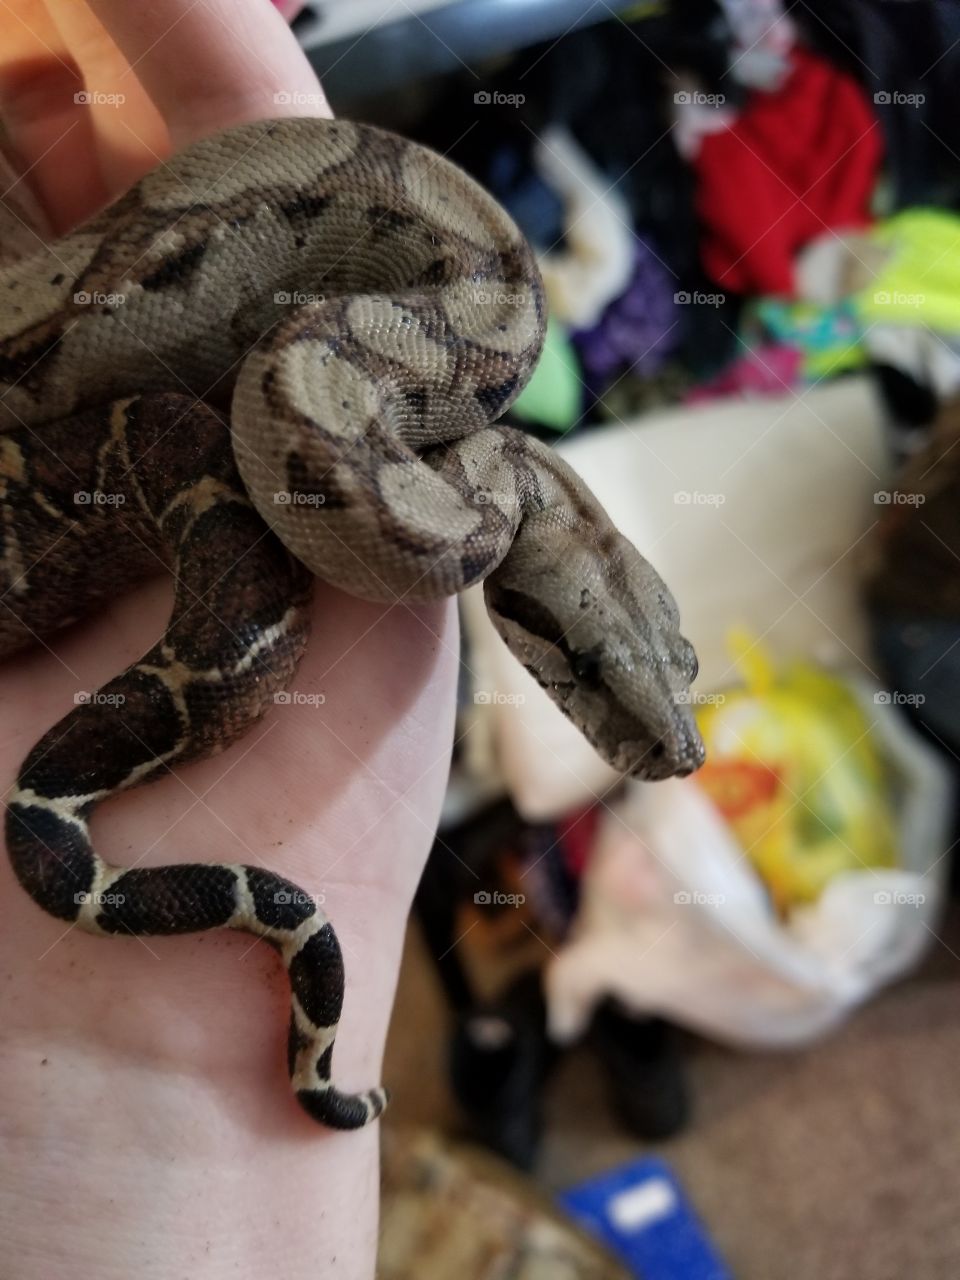 my Central American boa atlas has such a beauty